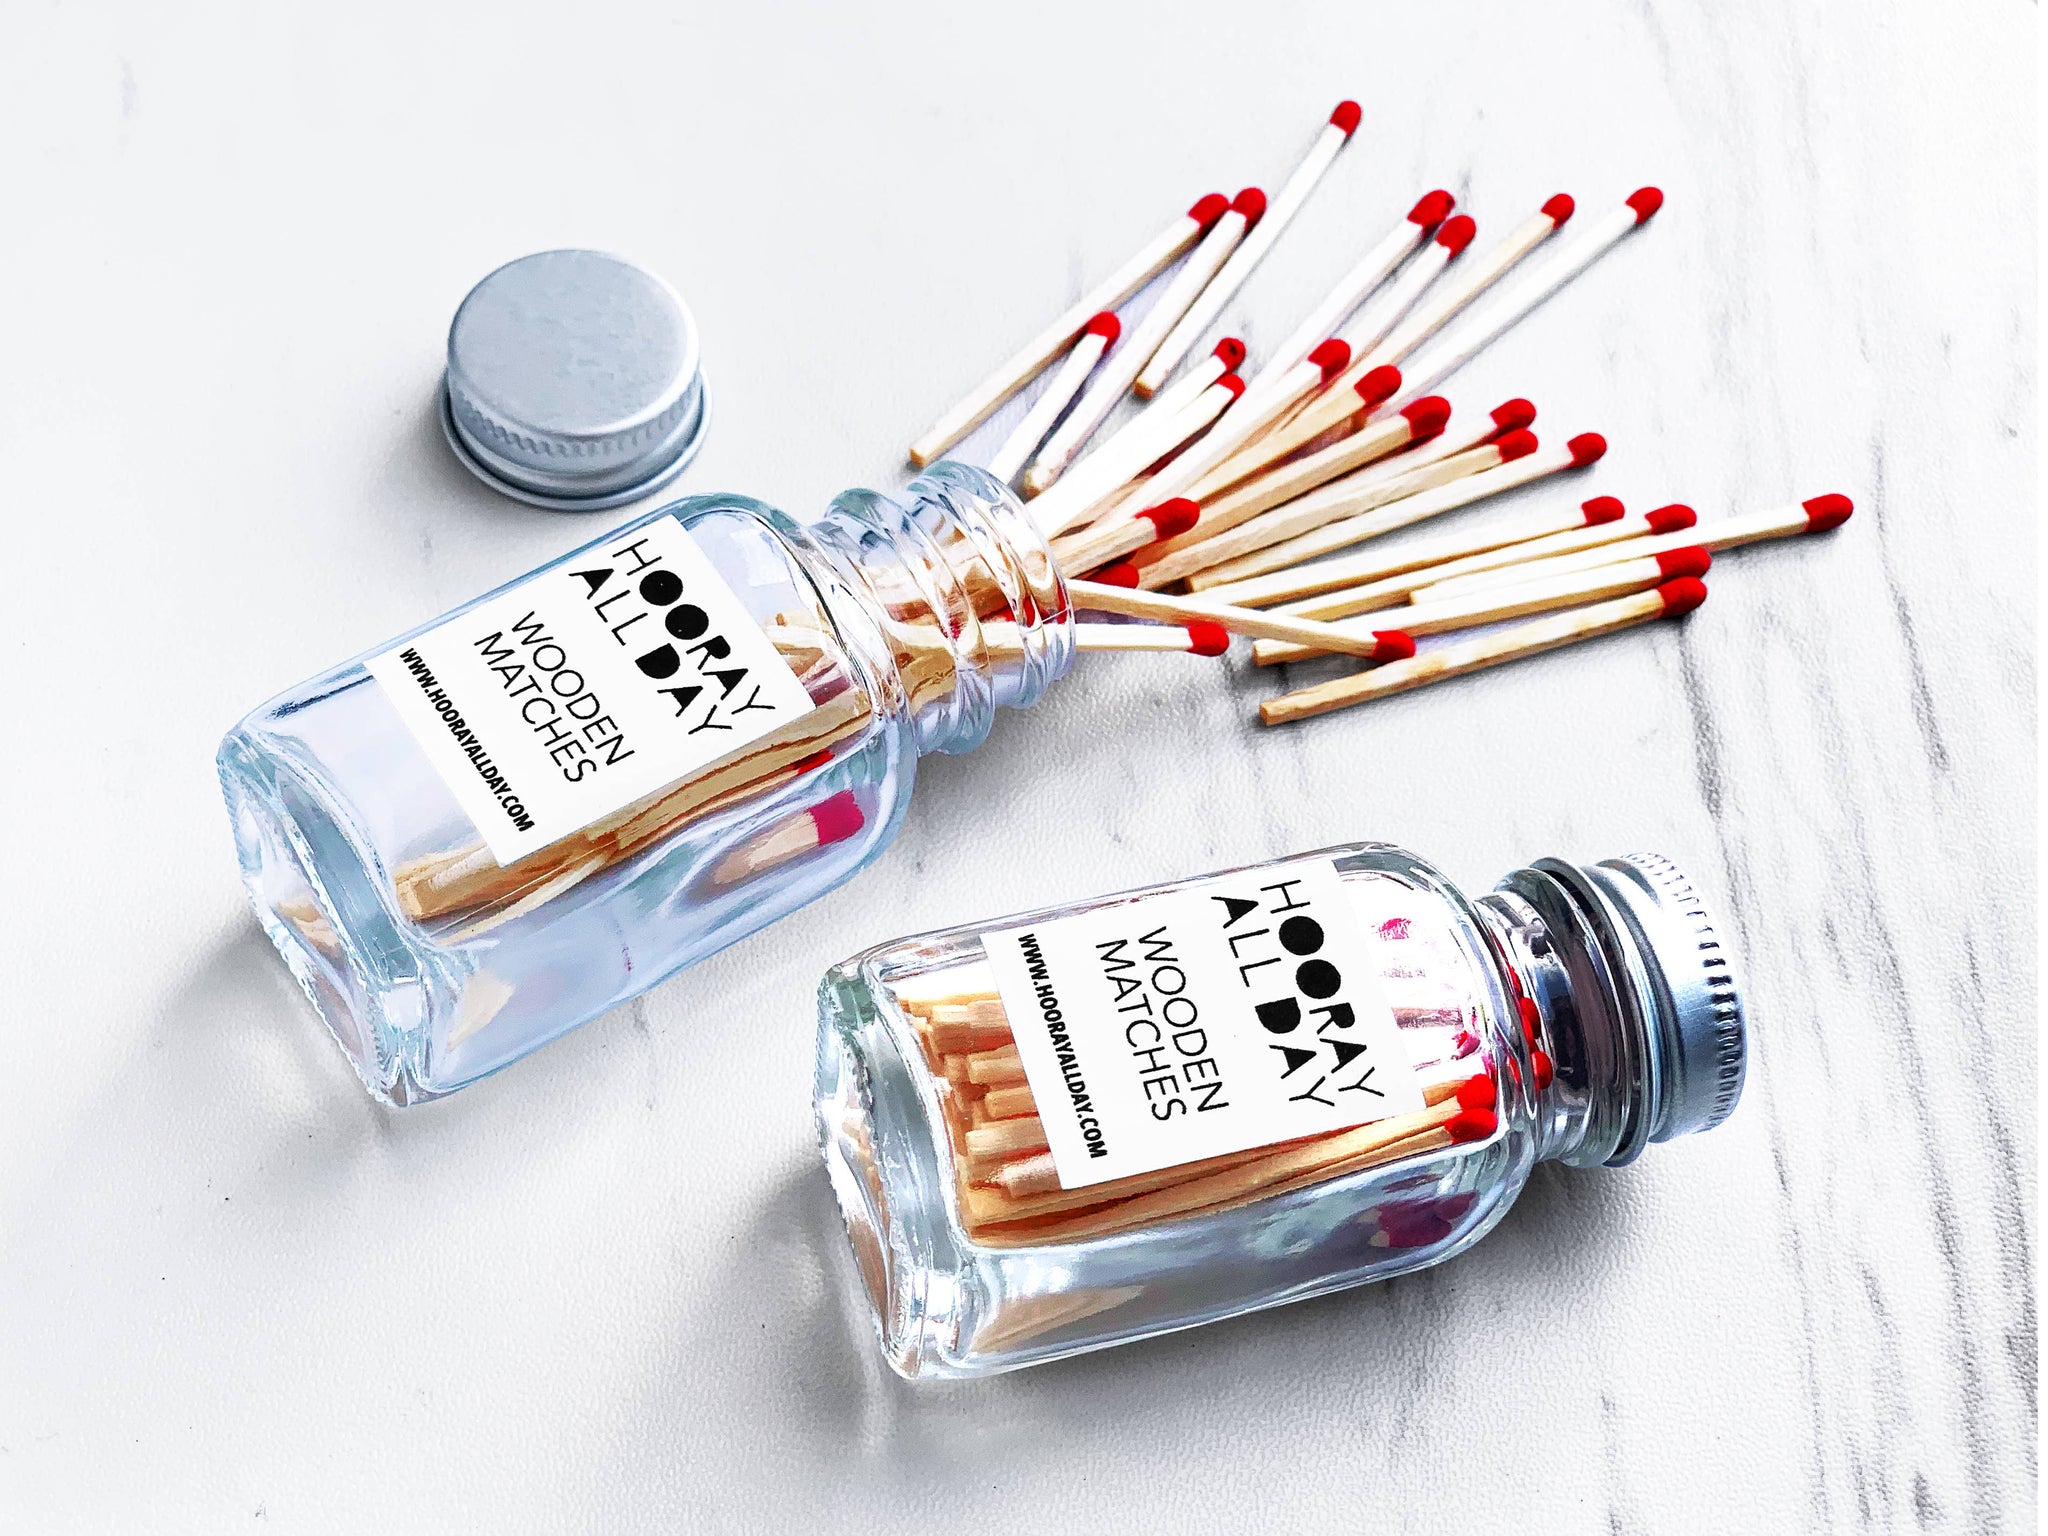 Colorful Wooden Matches In Little Glass Bottle